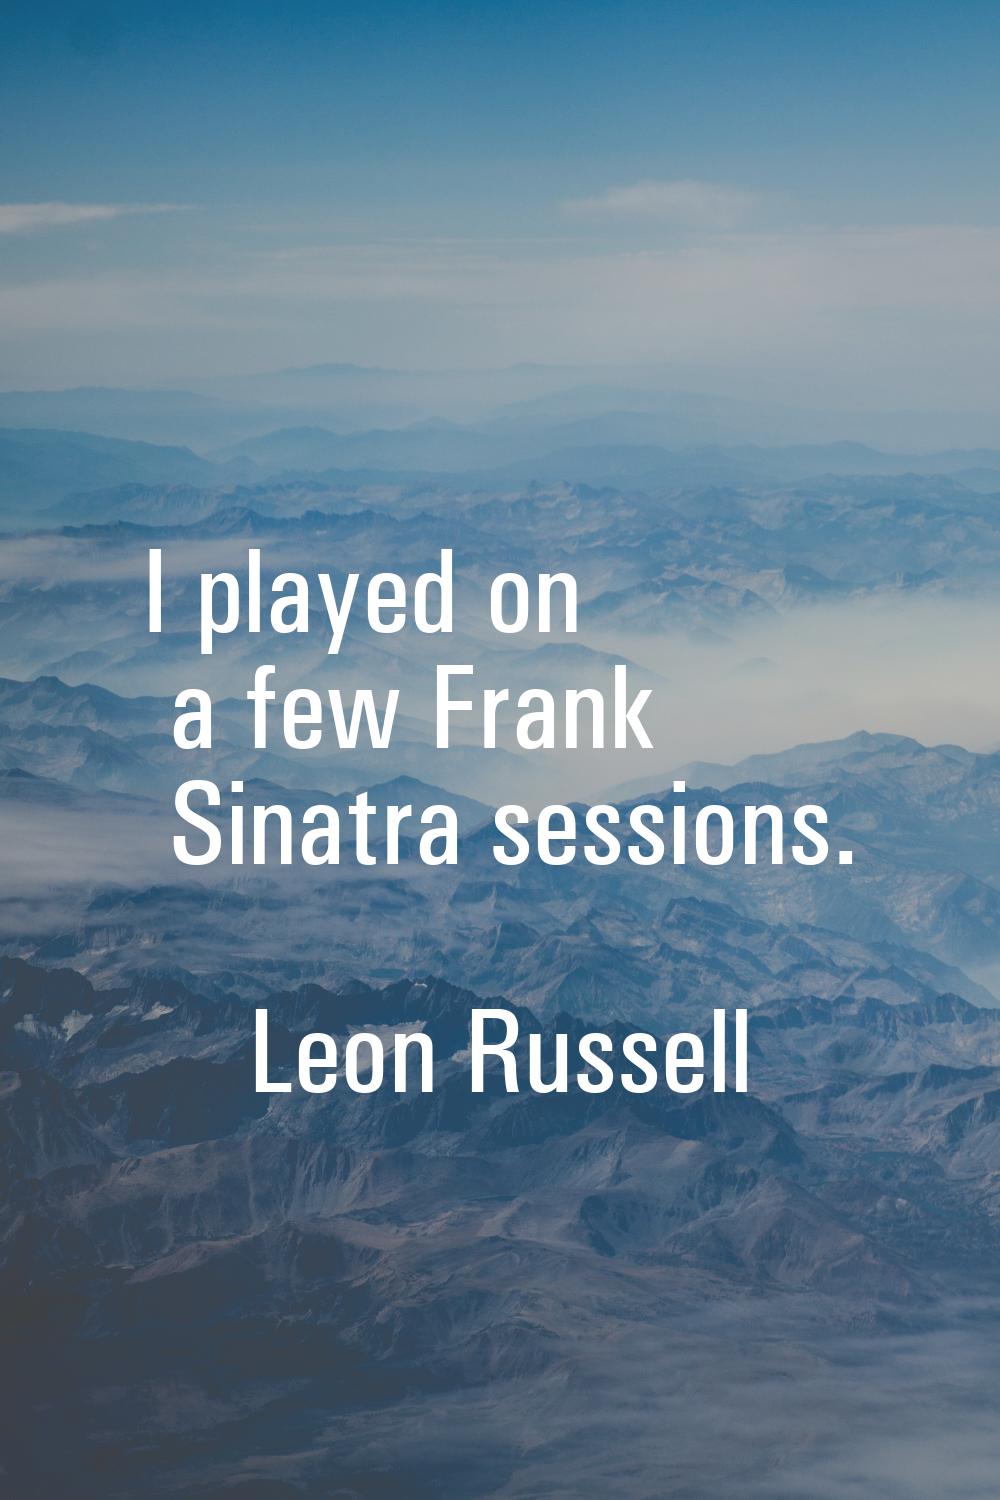 I played on a few Frank Sinatra sessions.